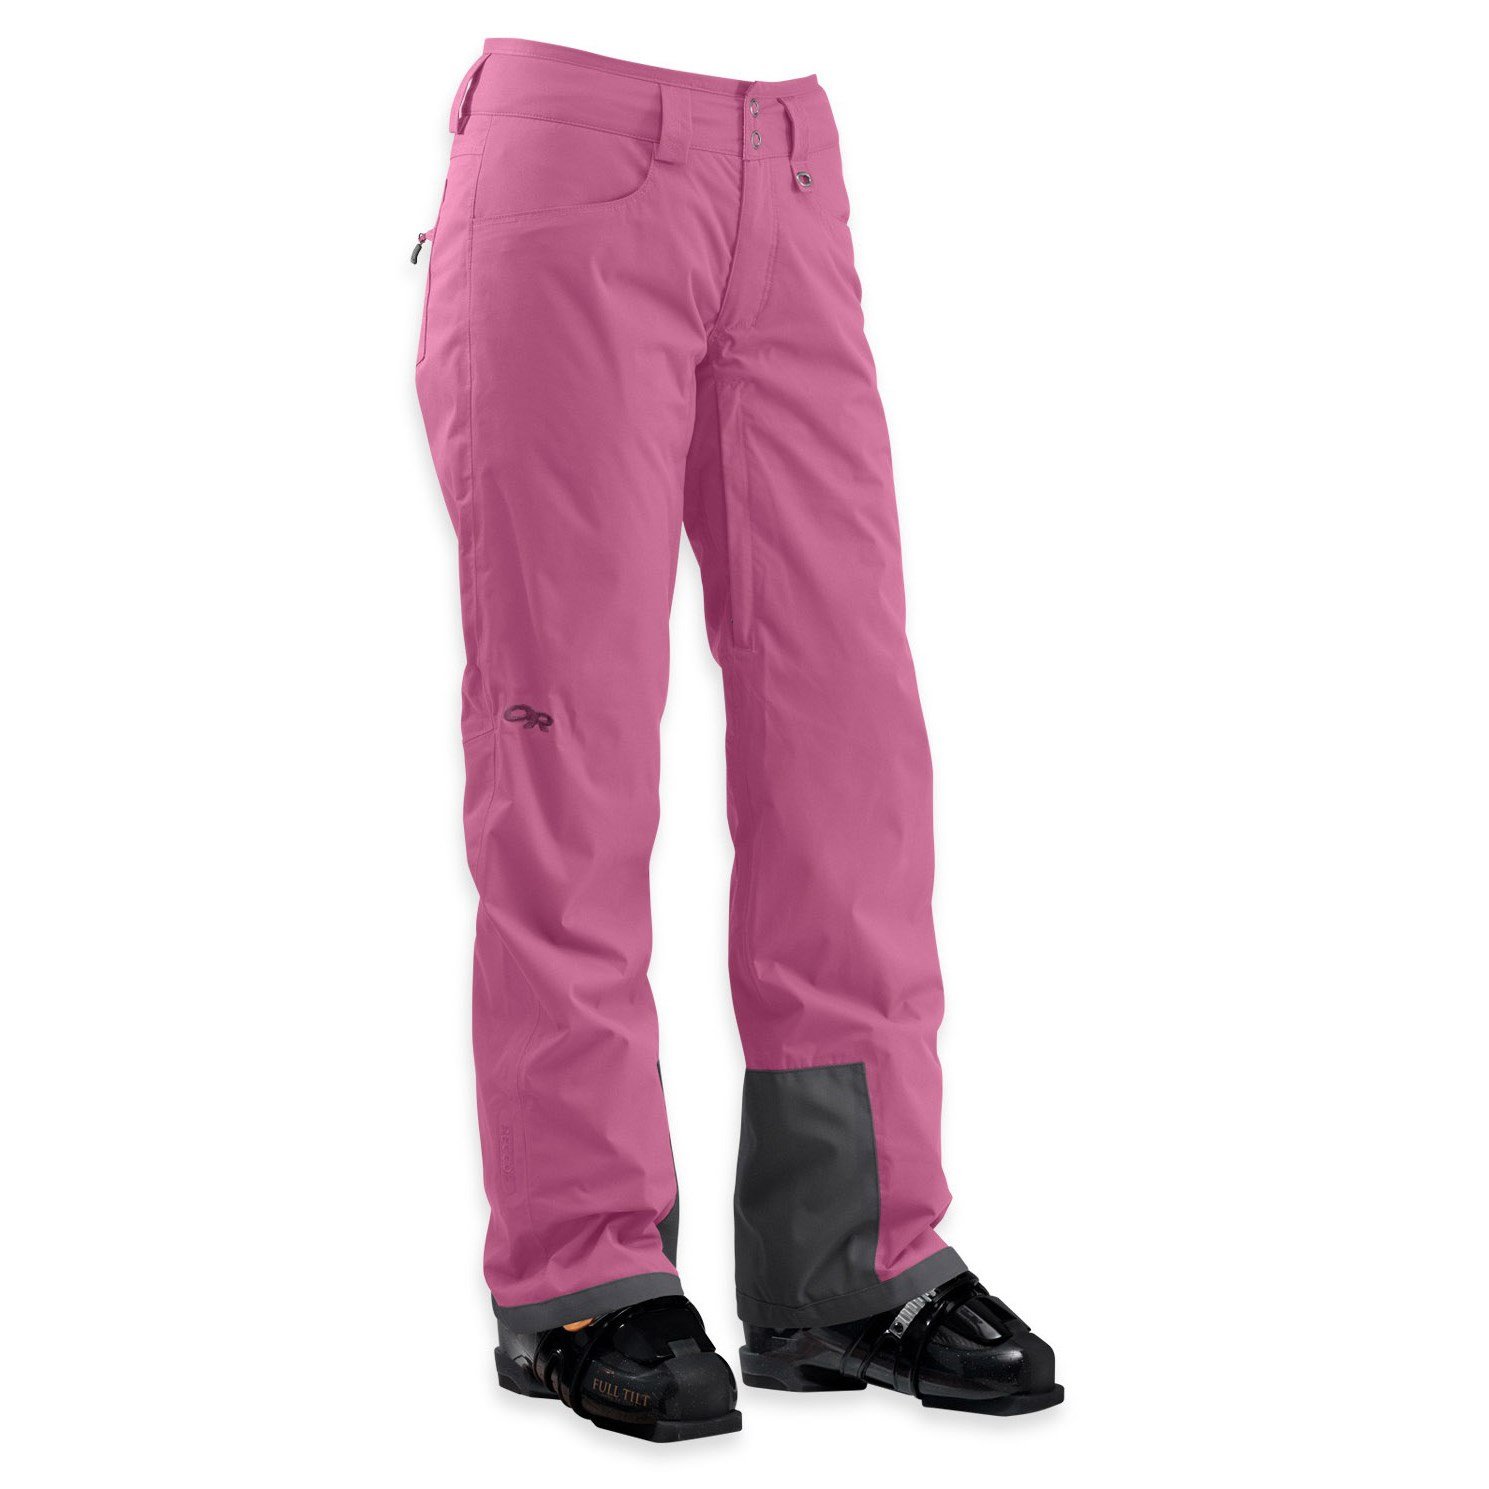 https://images.evo.com/imgp/zoom/70543/340036/outdoor-research-paramour-pants-women-s-.jpg